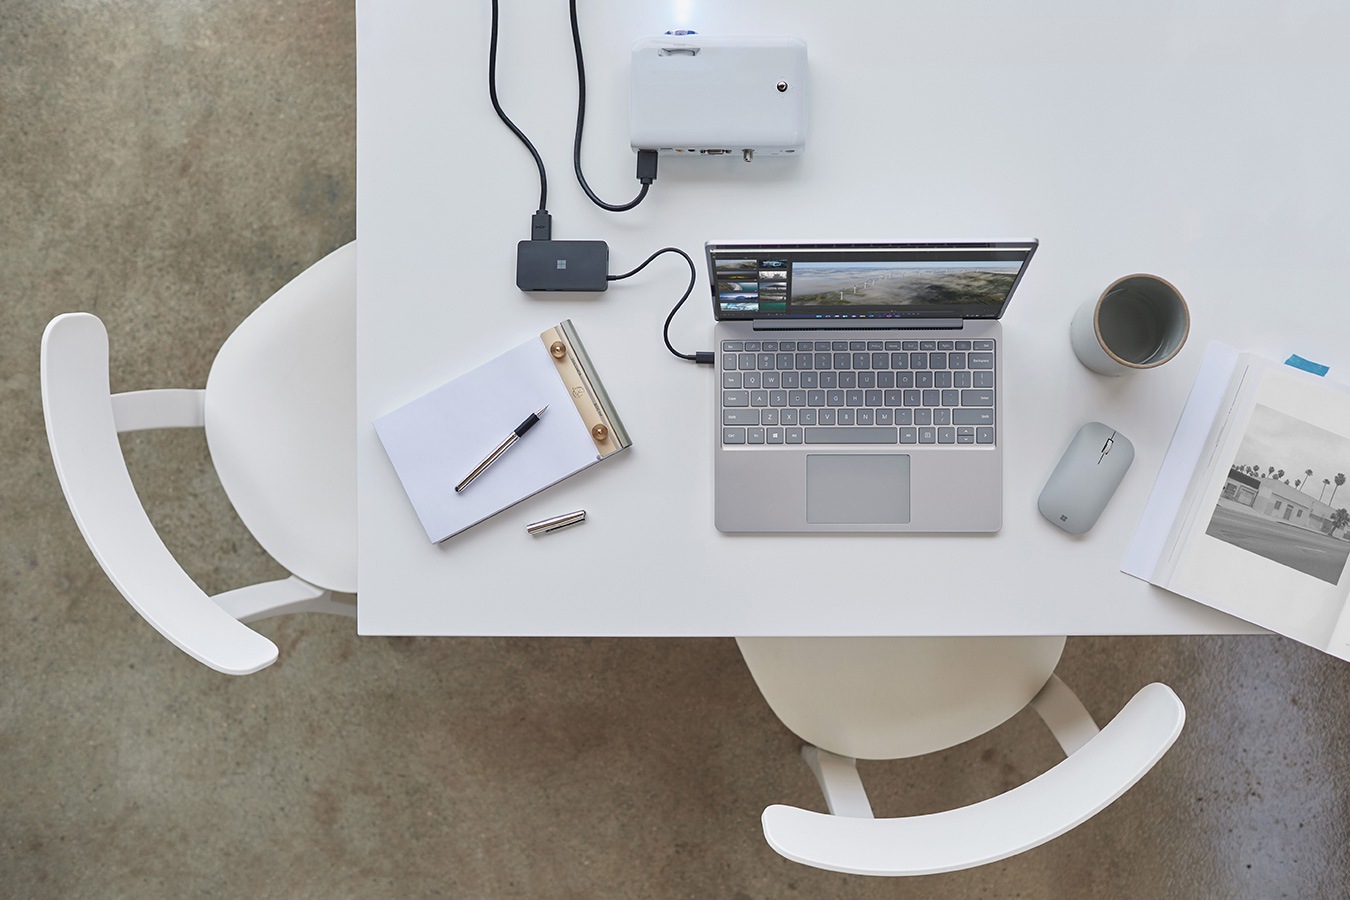 Surface Laptop Go on a desk and connected to a projector